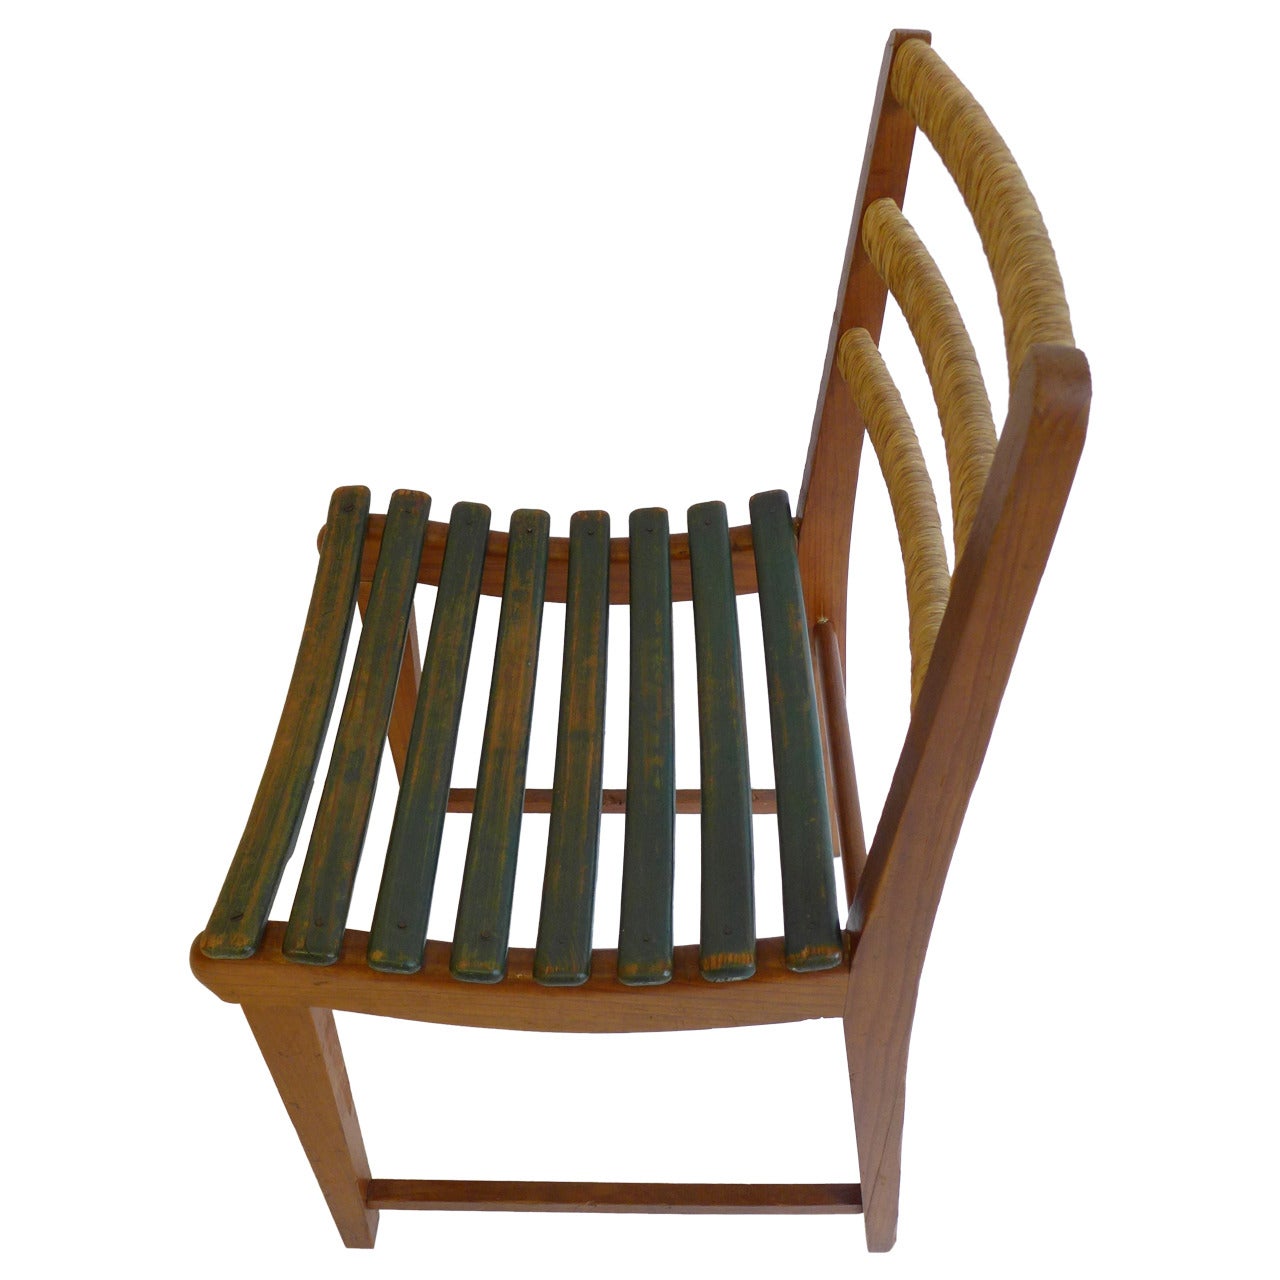 Modernist chair of pine with curved and painted wood slats and rush-wrapped back rails. Designed by Michael van Beuren for his company, Domus, and produced in Mexico, circa 1947. Born in New York City, van Beuren (1911-2004) studied at the Bauhaus